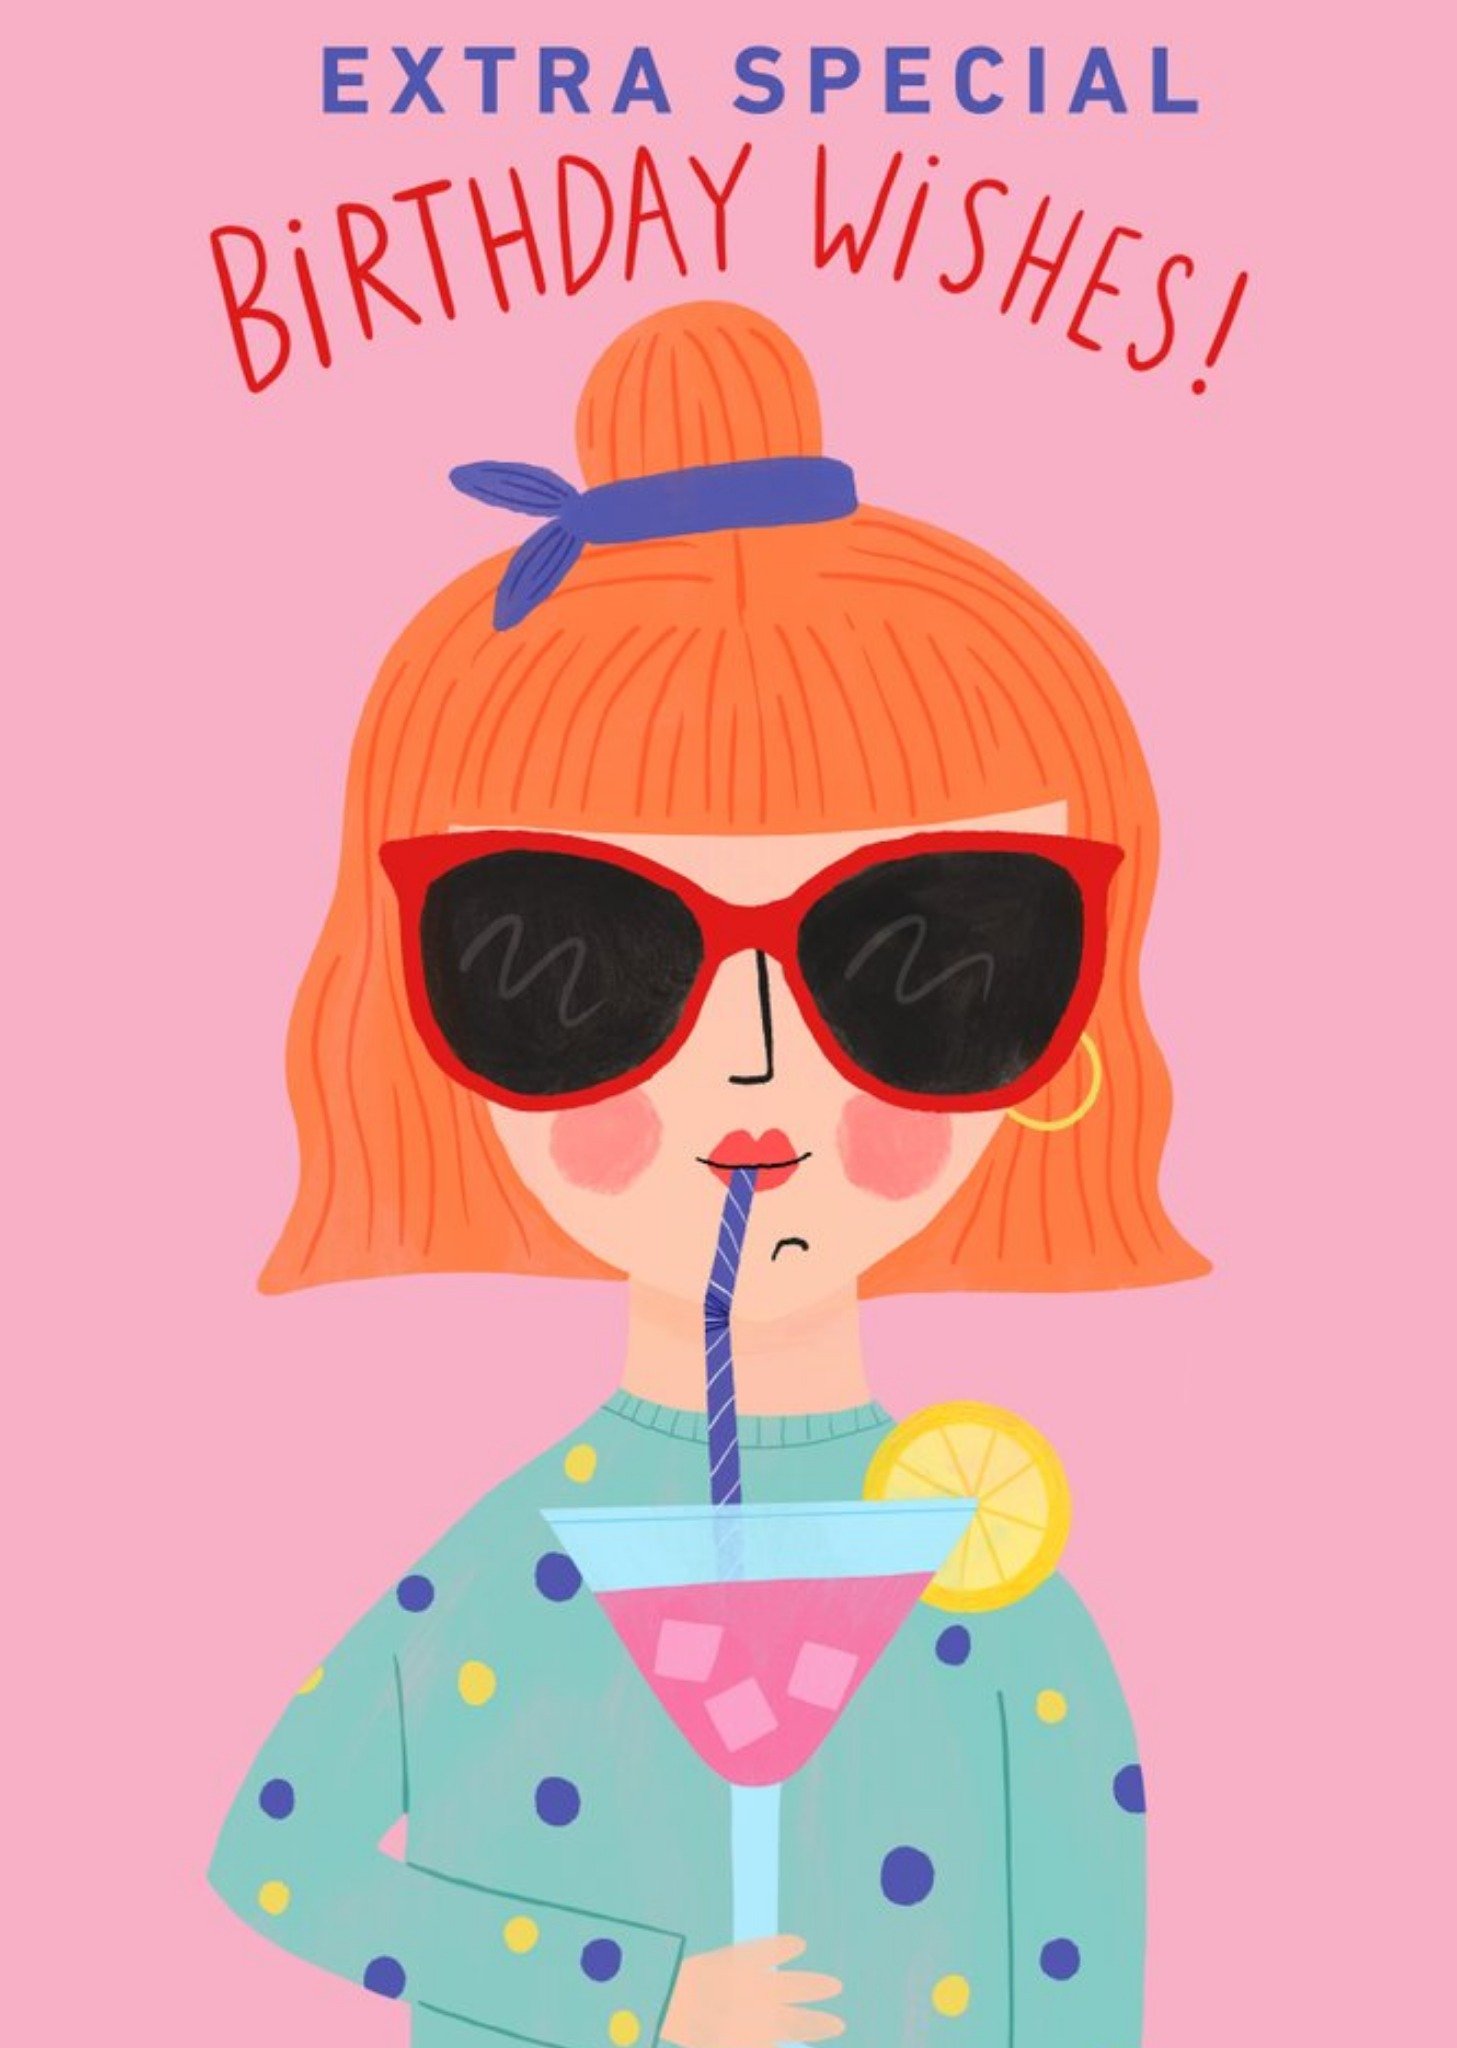 Other Yay Today Illustrated Extra Special Birthday Wishes Card Ecard